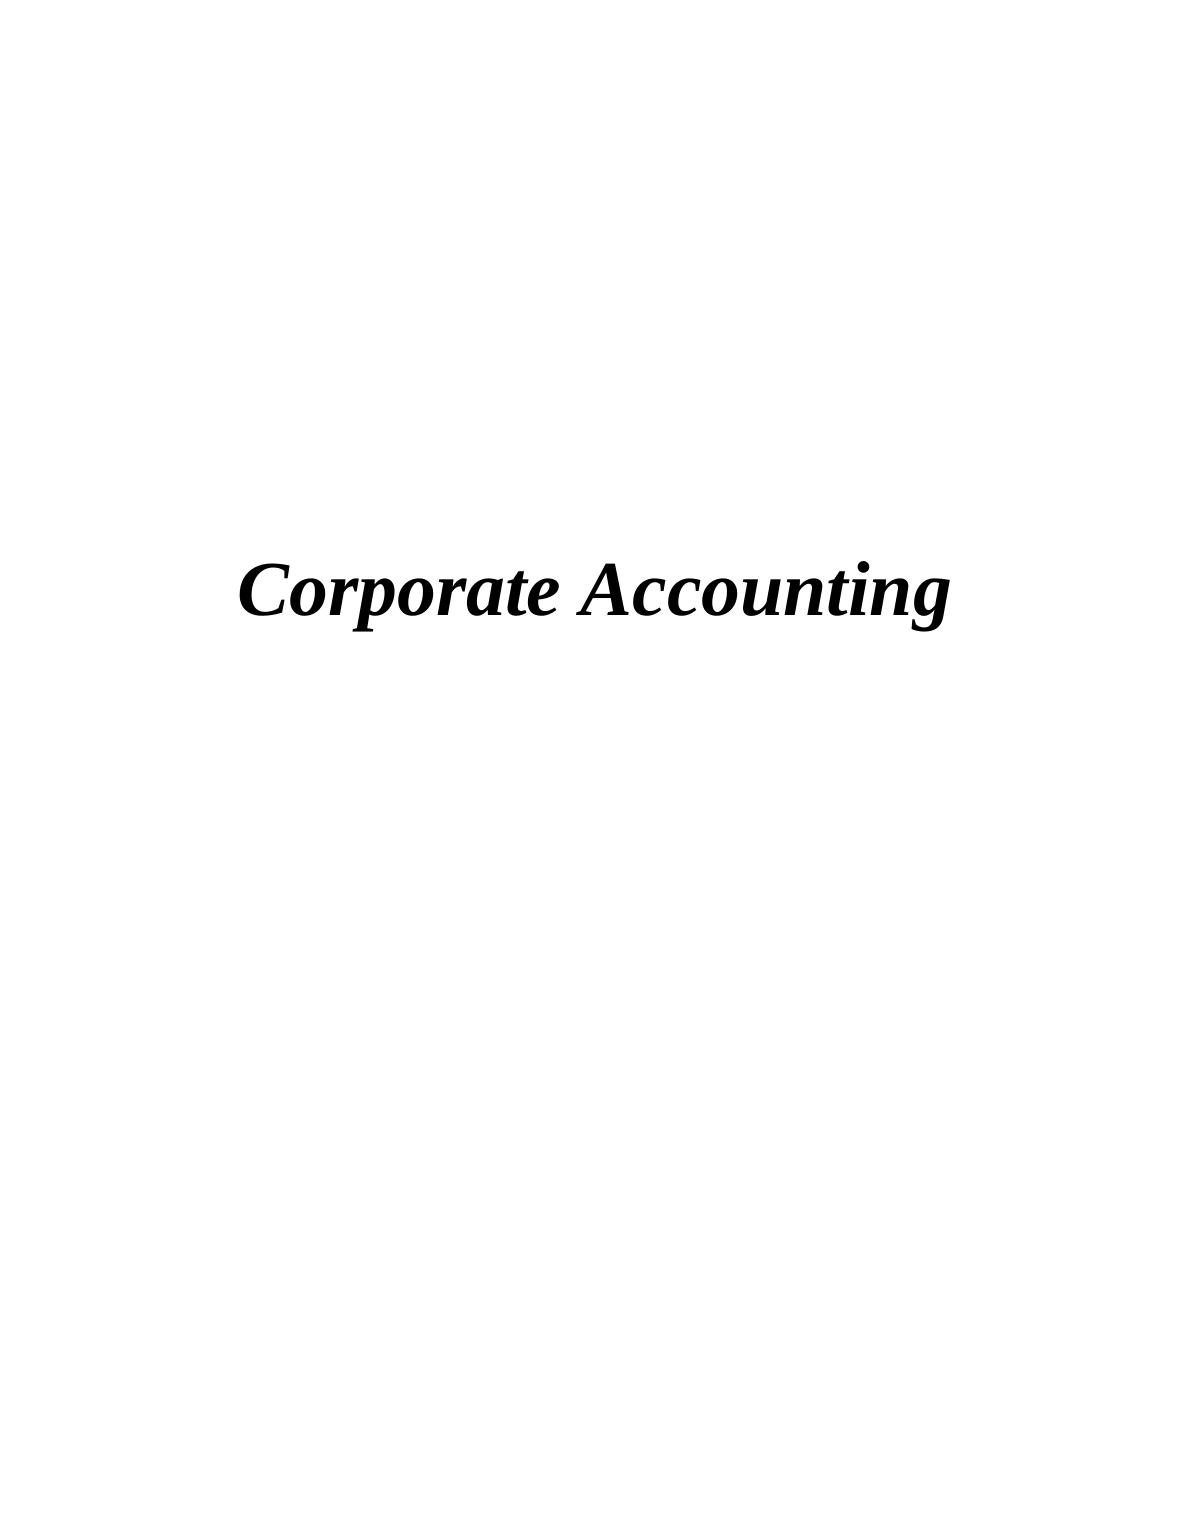 Corporate Accounting_1